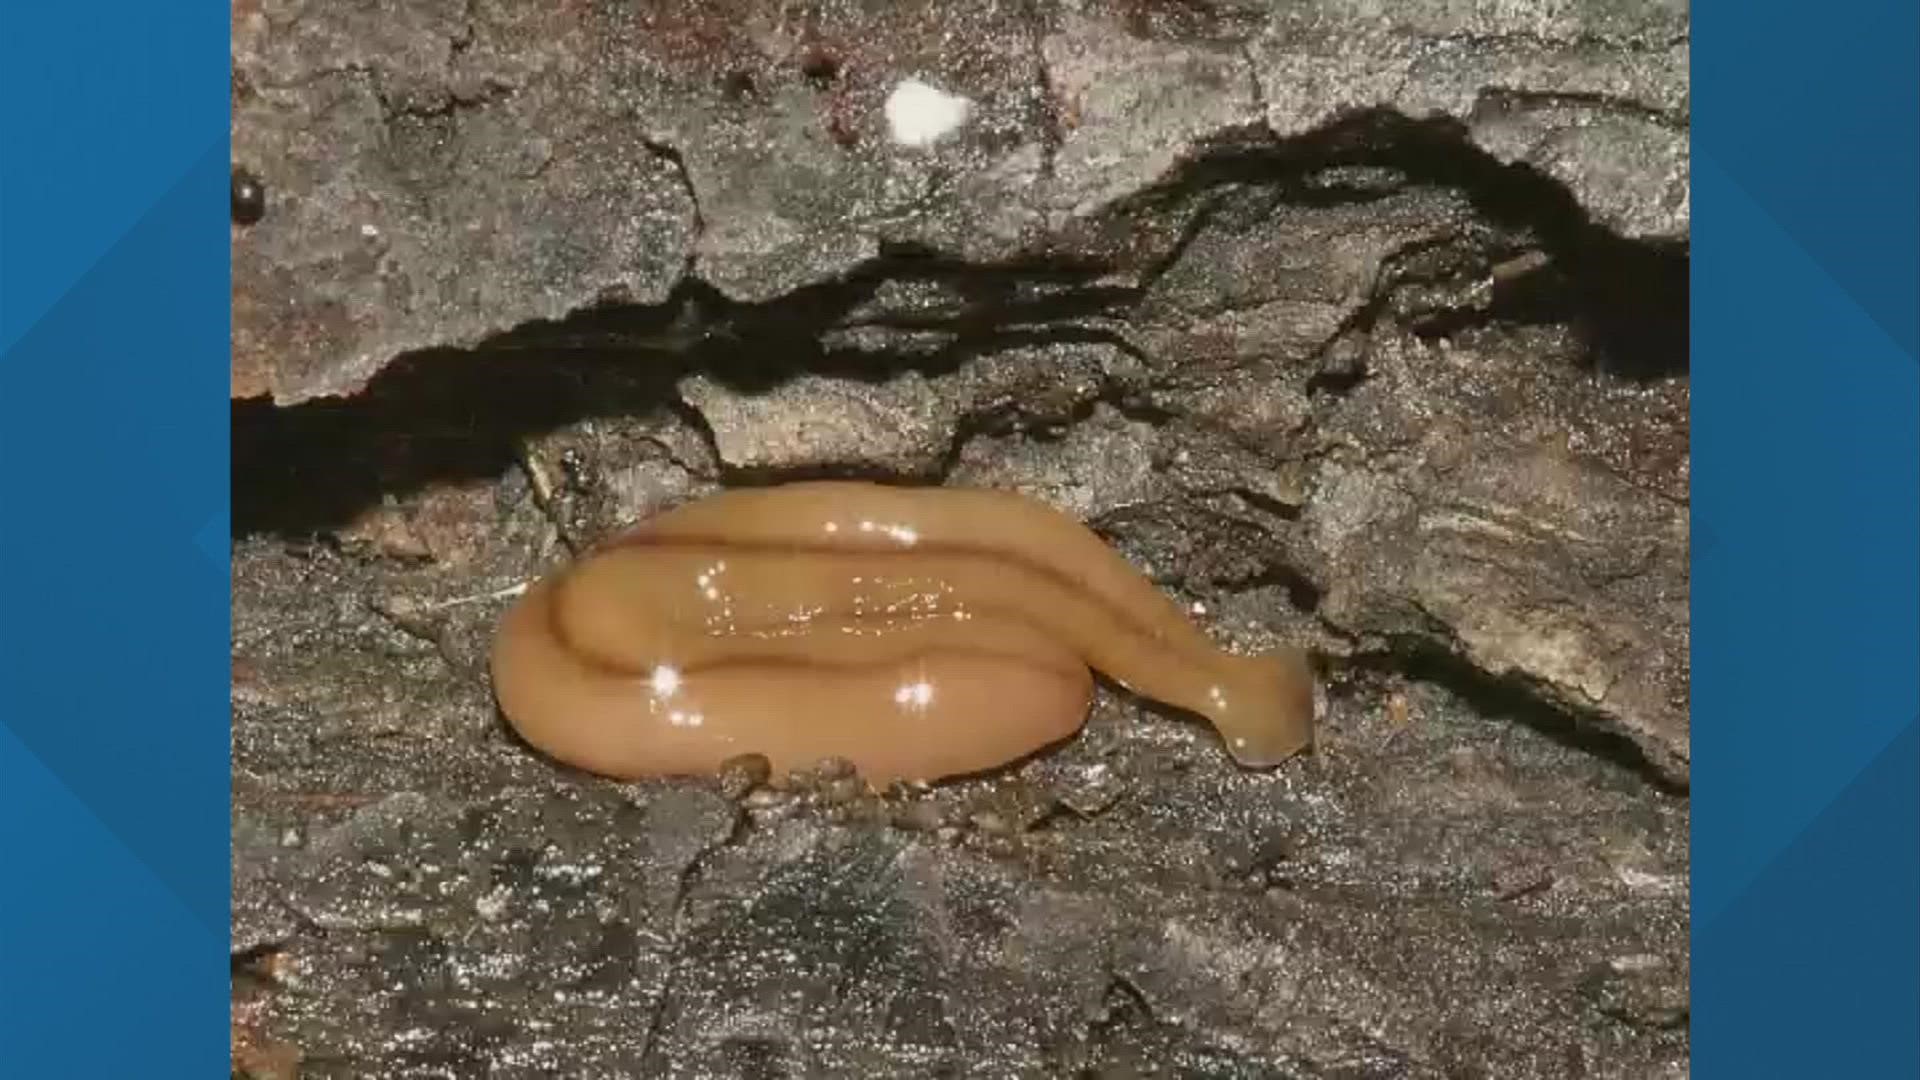 Reports of Hammerhead Flatworms have been spotted across Central Ohio.